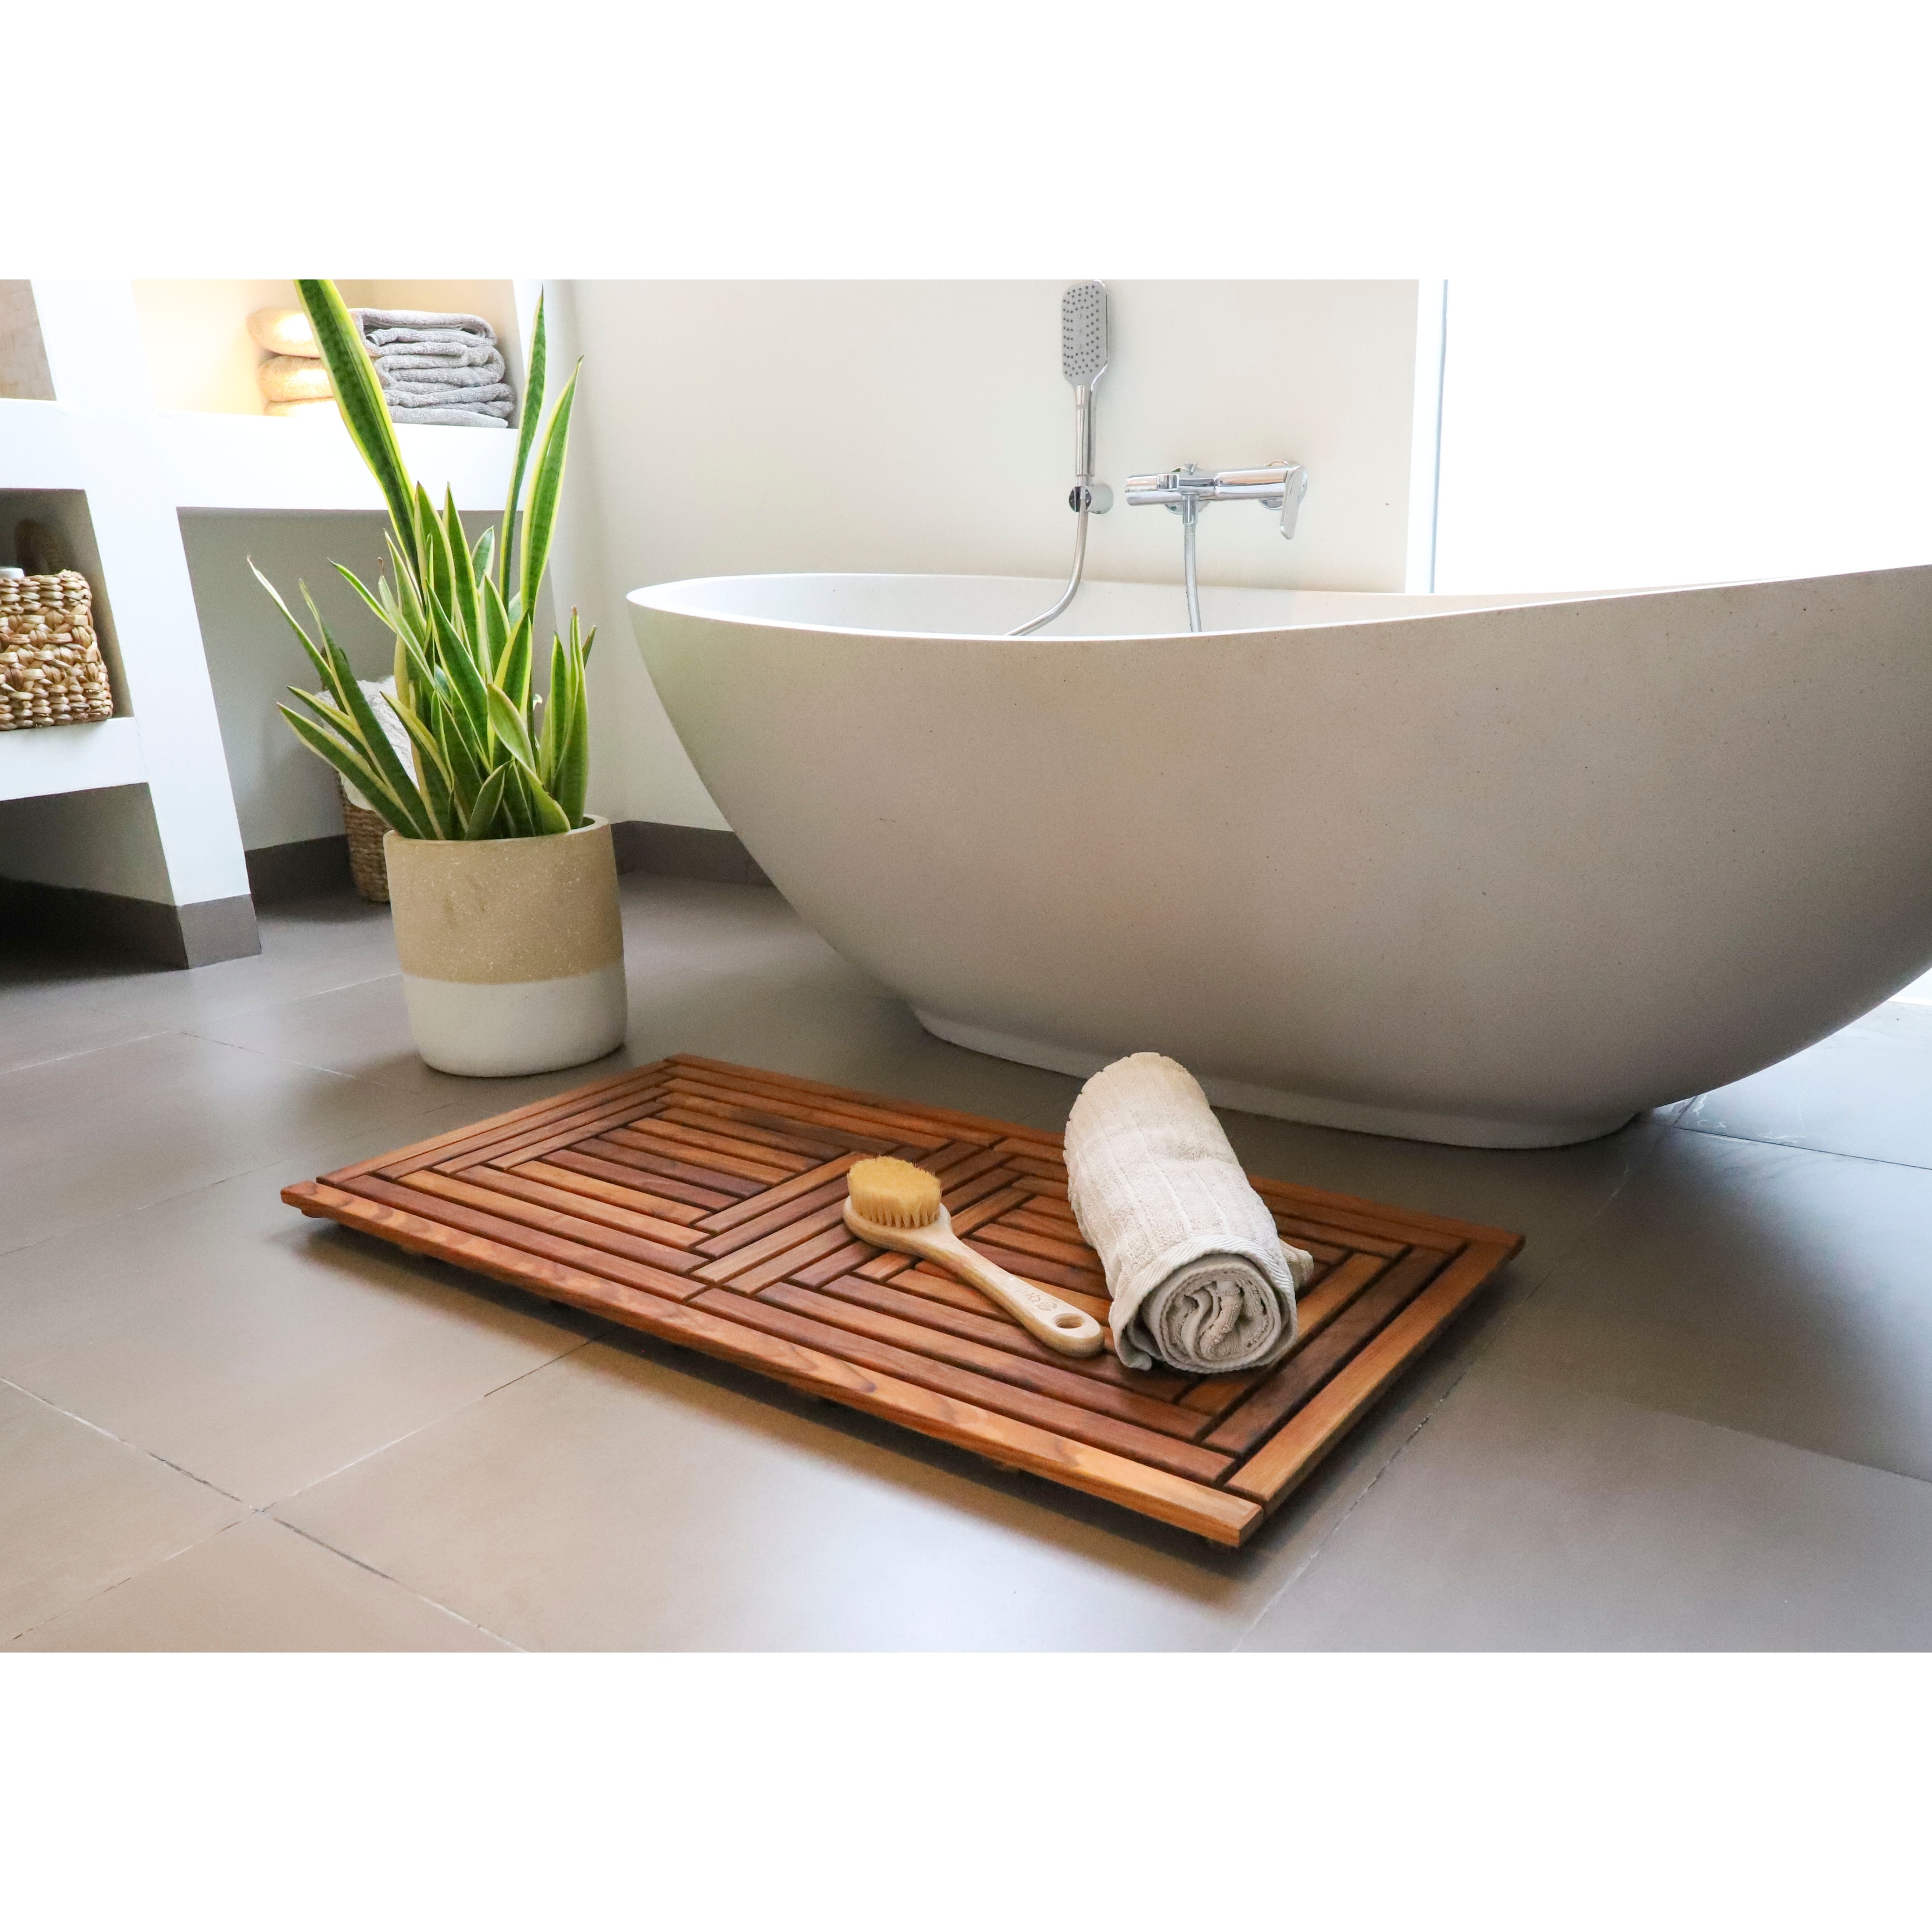 https://ak1.ostkcdn.com/images/products/is/images/direct/93ed1f3b312ae7bb537ceb188a181350d932d68f/Nordic-Style-Teak-Oiled-Double-Framed-Shower-Bath-Mat-39%22-x-19%22.jpg